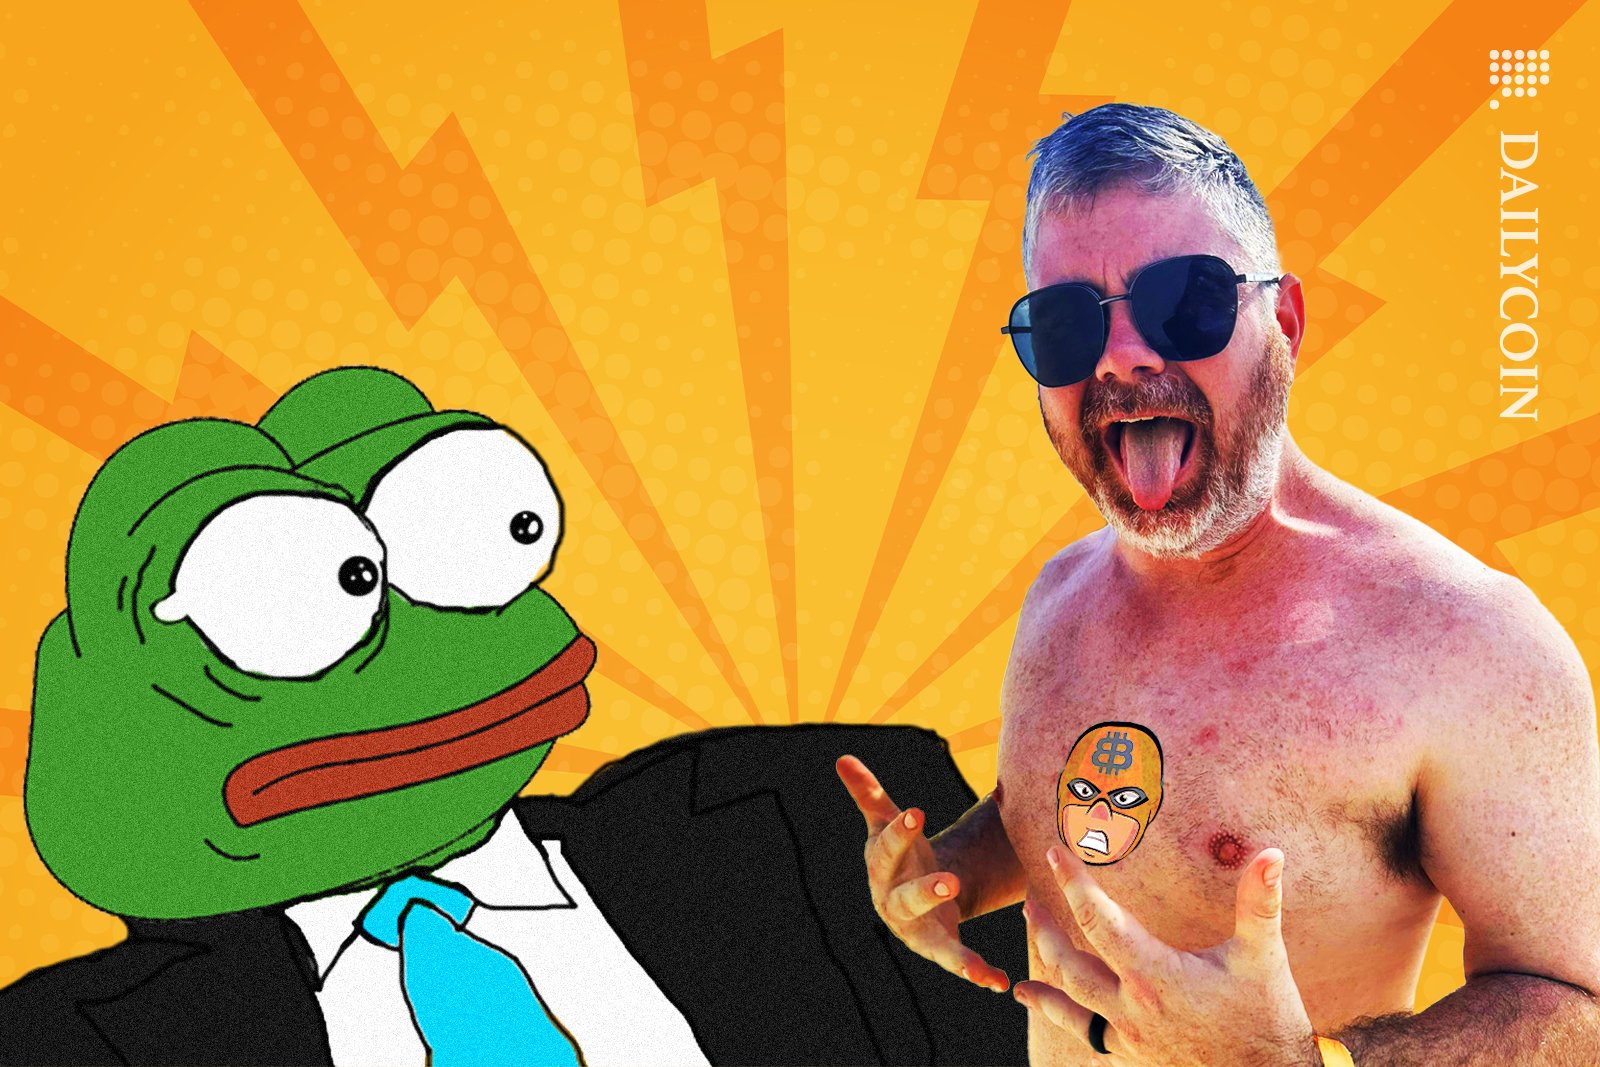 Angry PEPE looking at BITBOY who is posing shirtless with his tongue out.